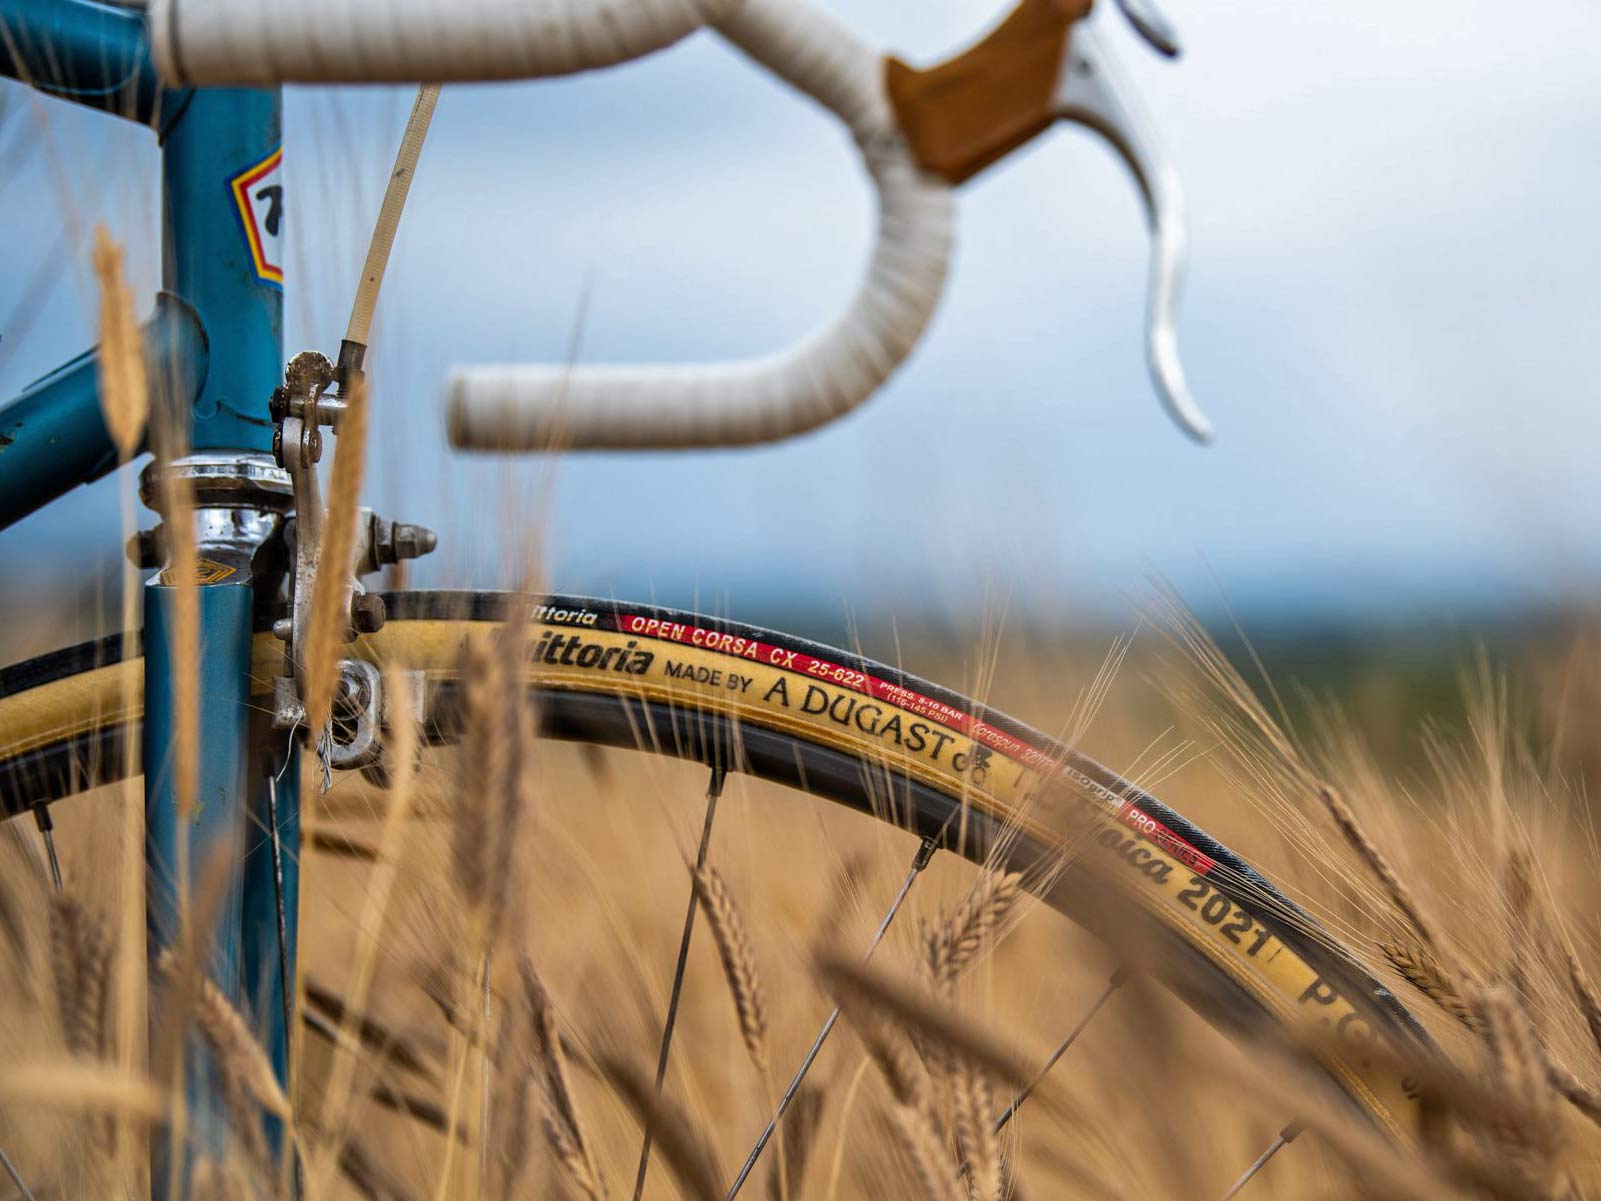 Vittoria made by A Dugast L Eroica limited edition 25mm retro vintage tubular road bike tires, field